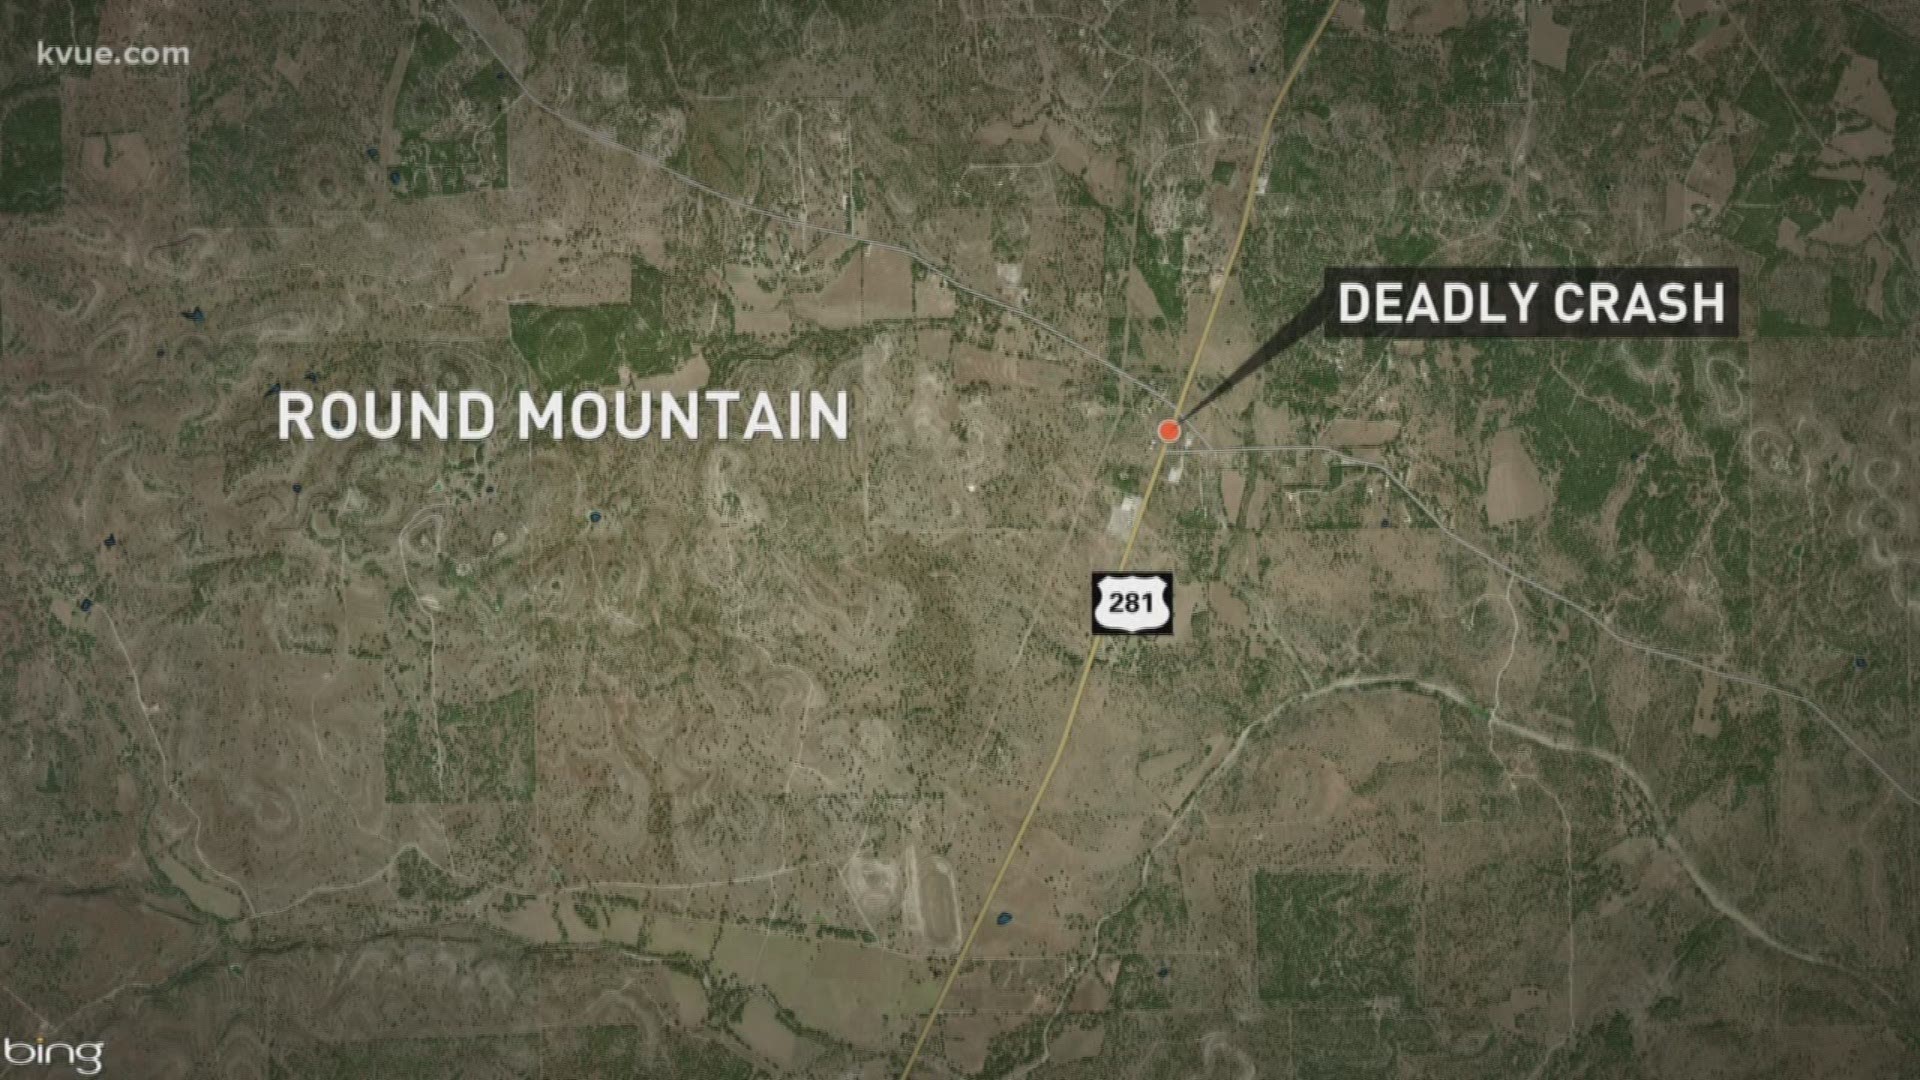 The man who died in a crash in Round Mountain in Blanco County Wednesday has been identified.